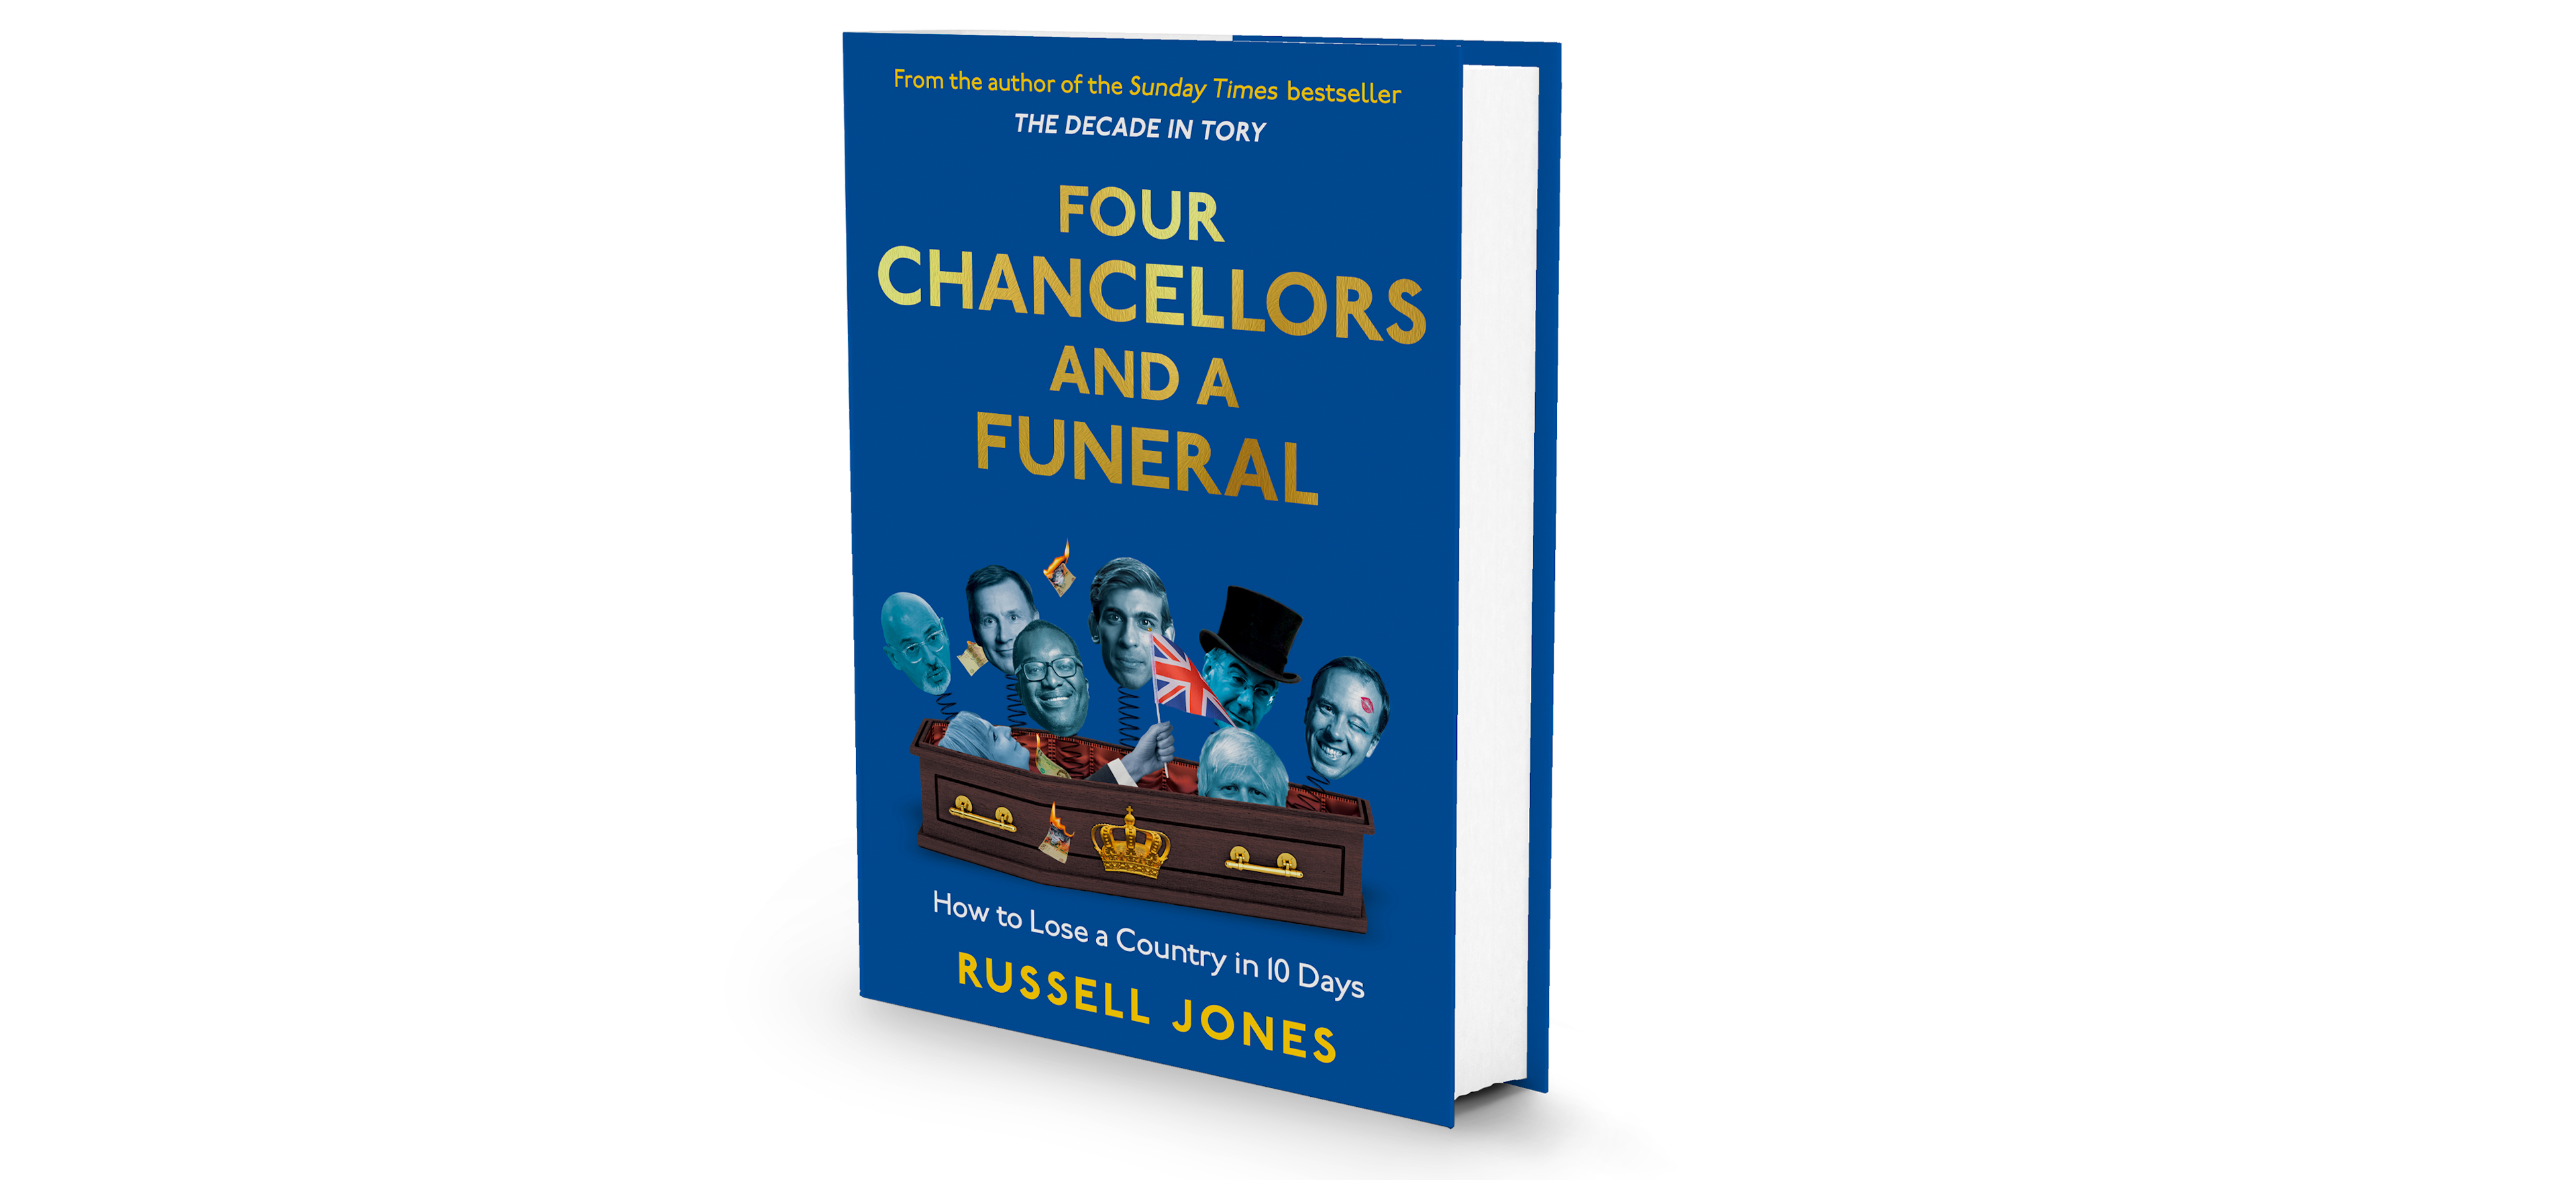 Four Chancellors and a Funeral